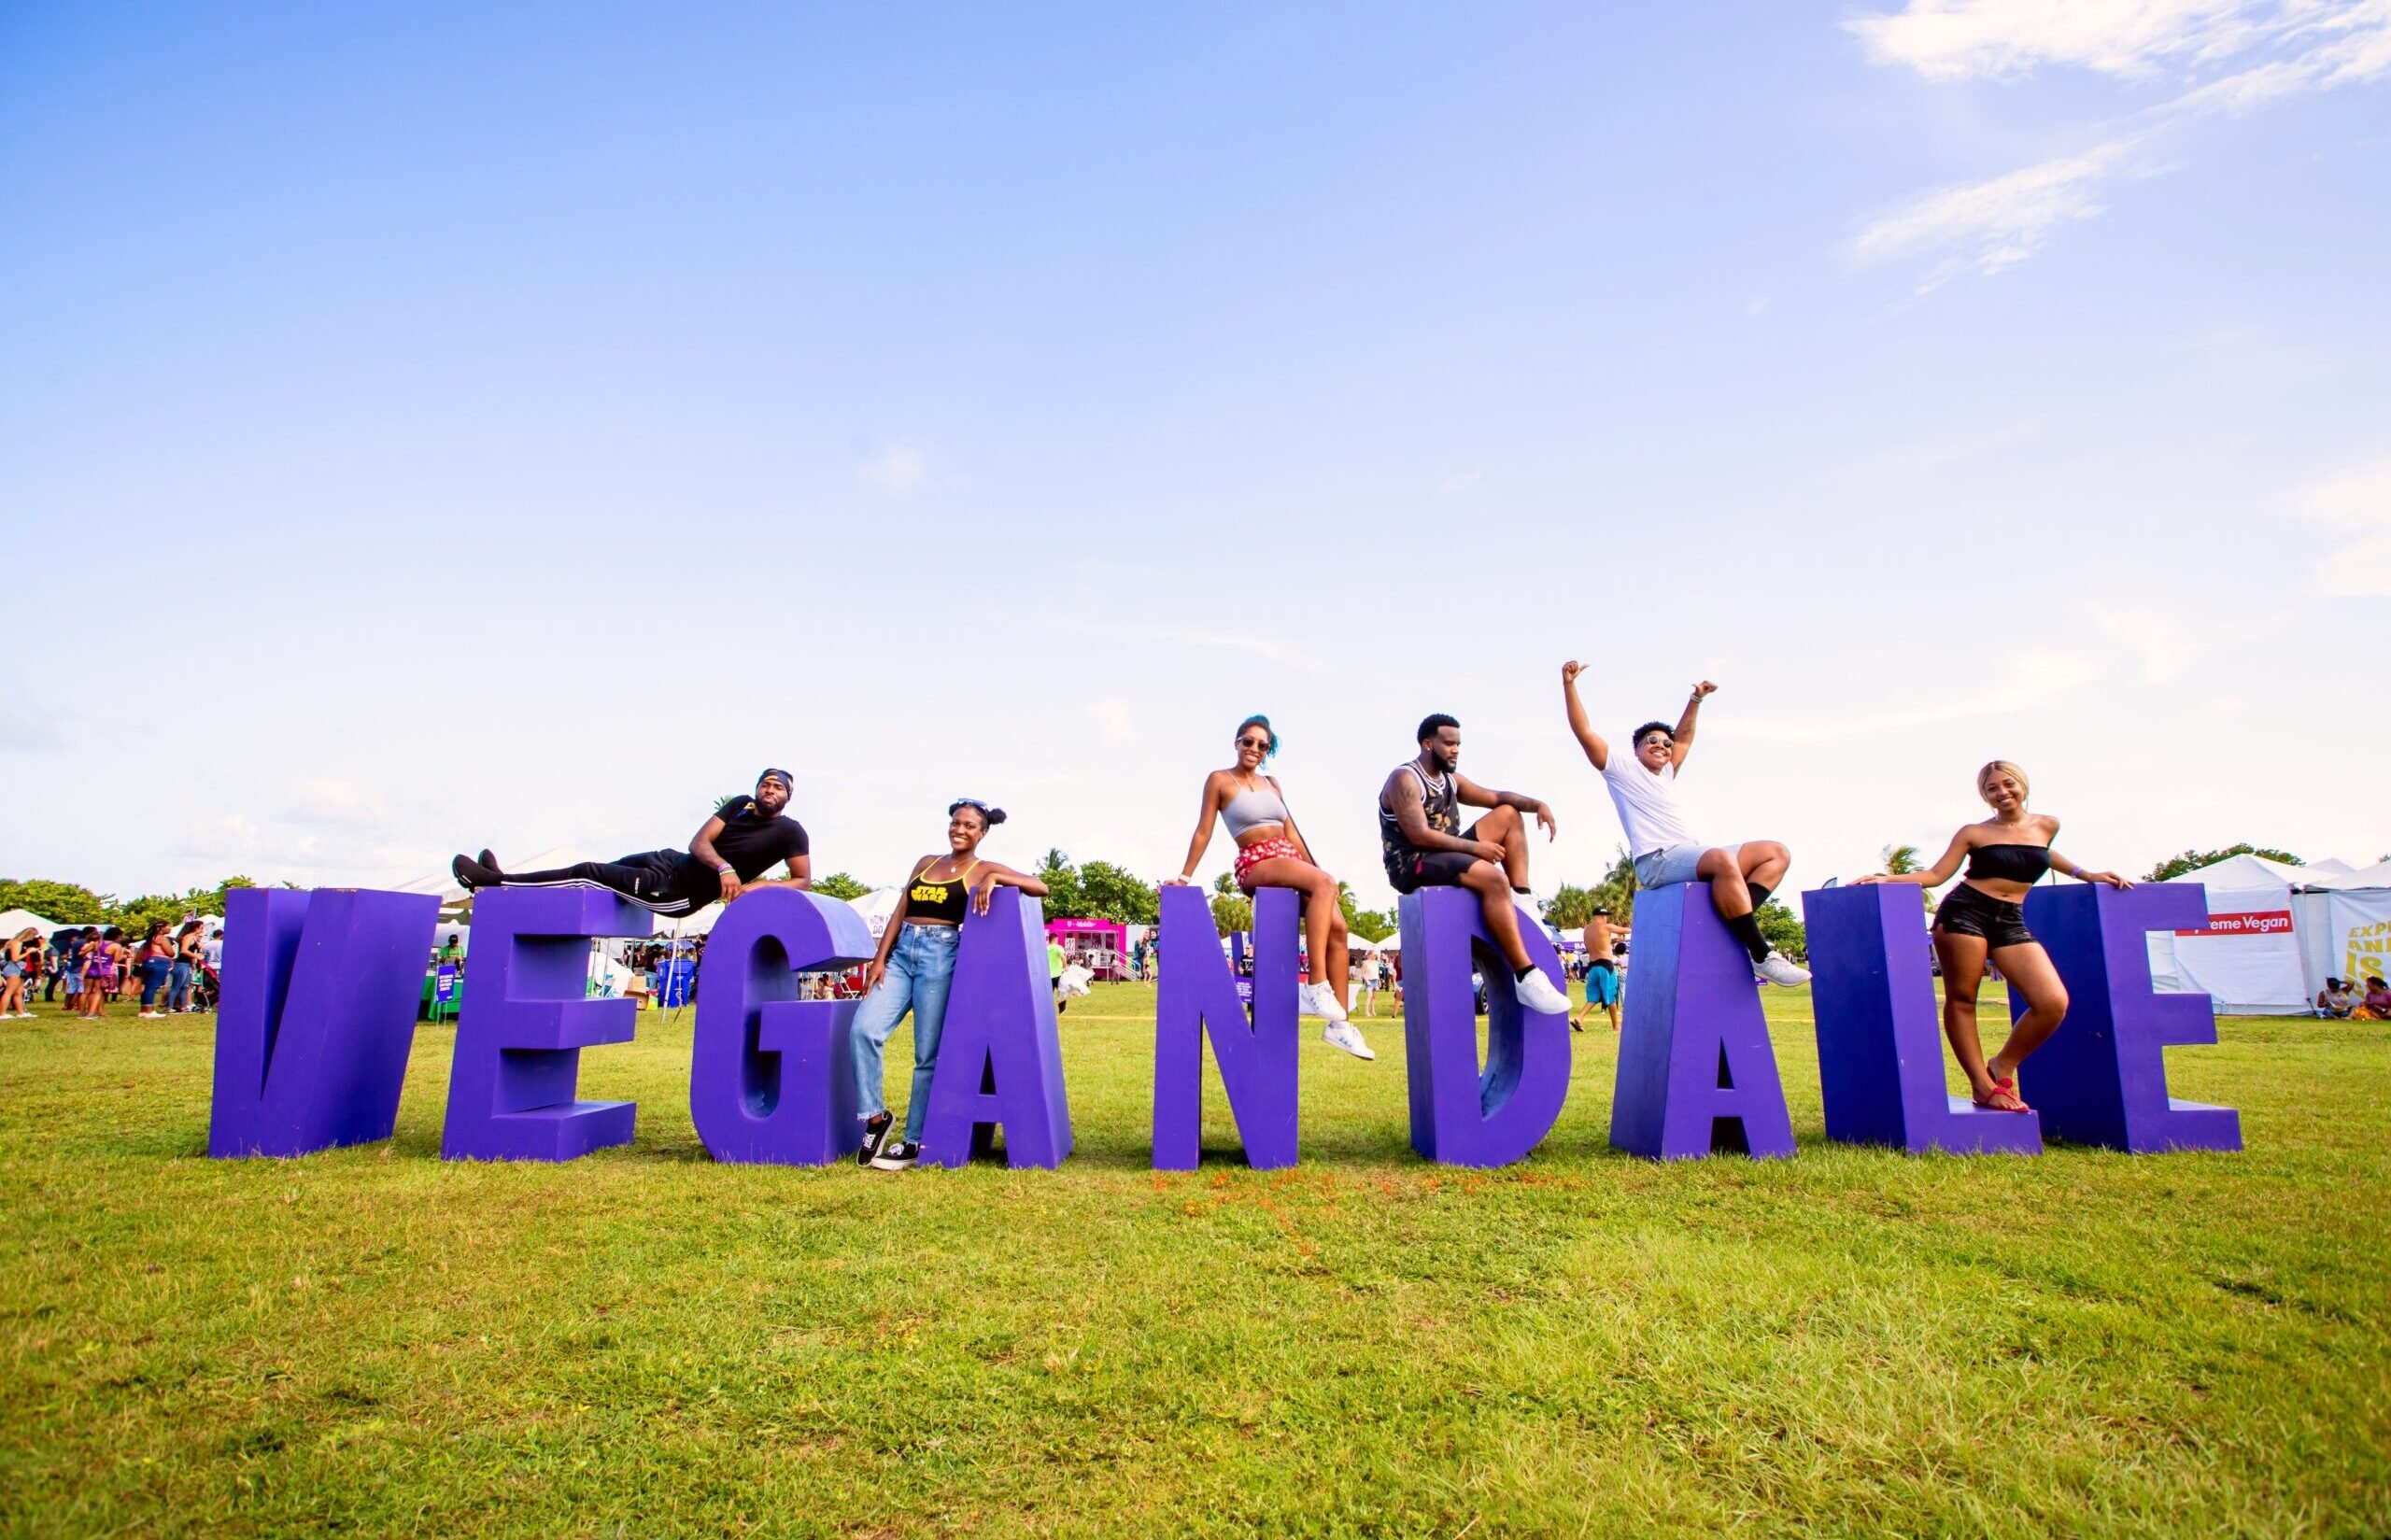 Vegandale Heads to LA on the Heels of Record-breaking NYC Event